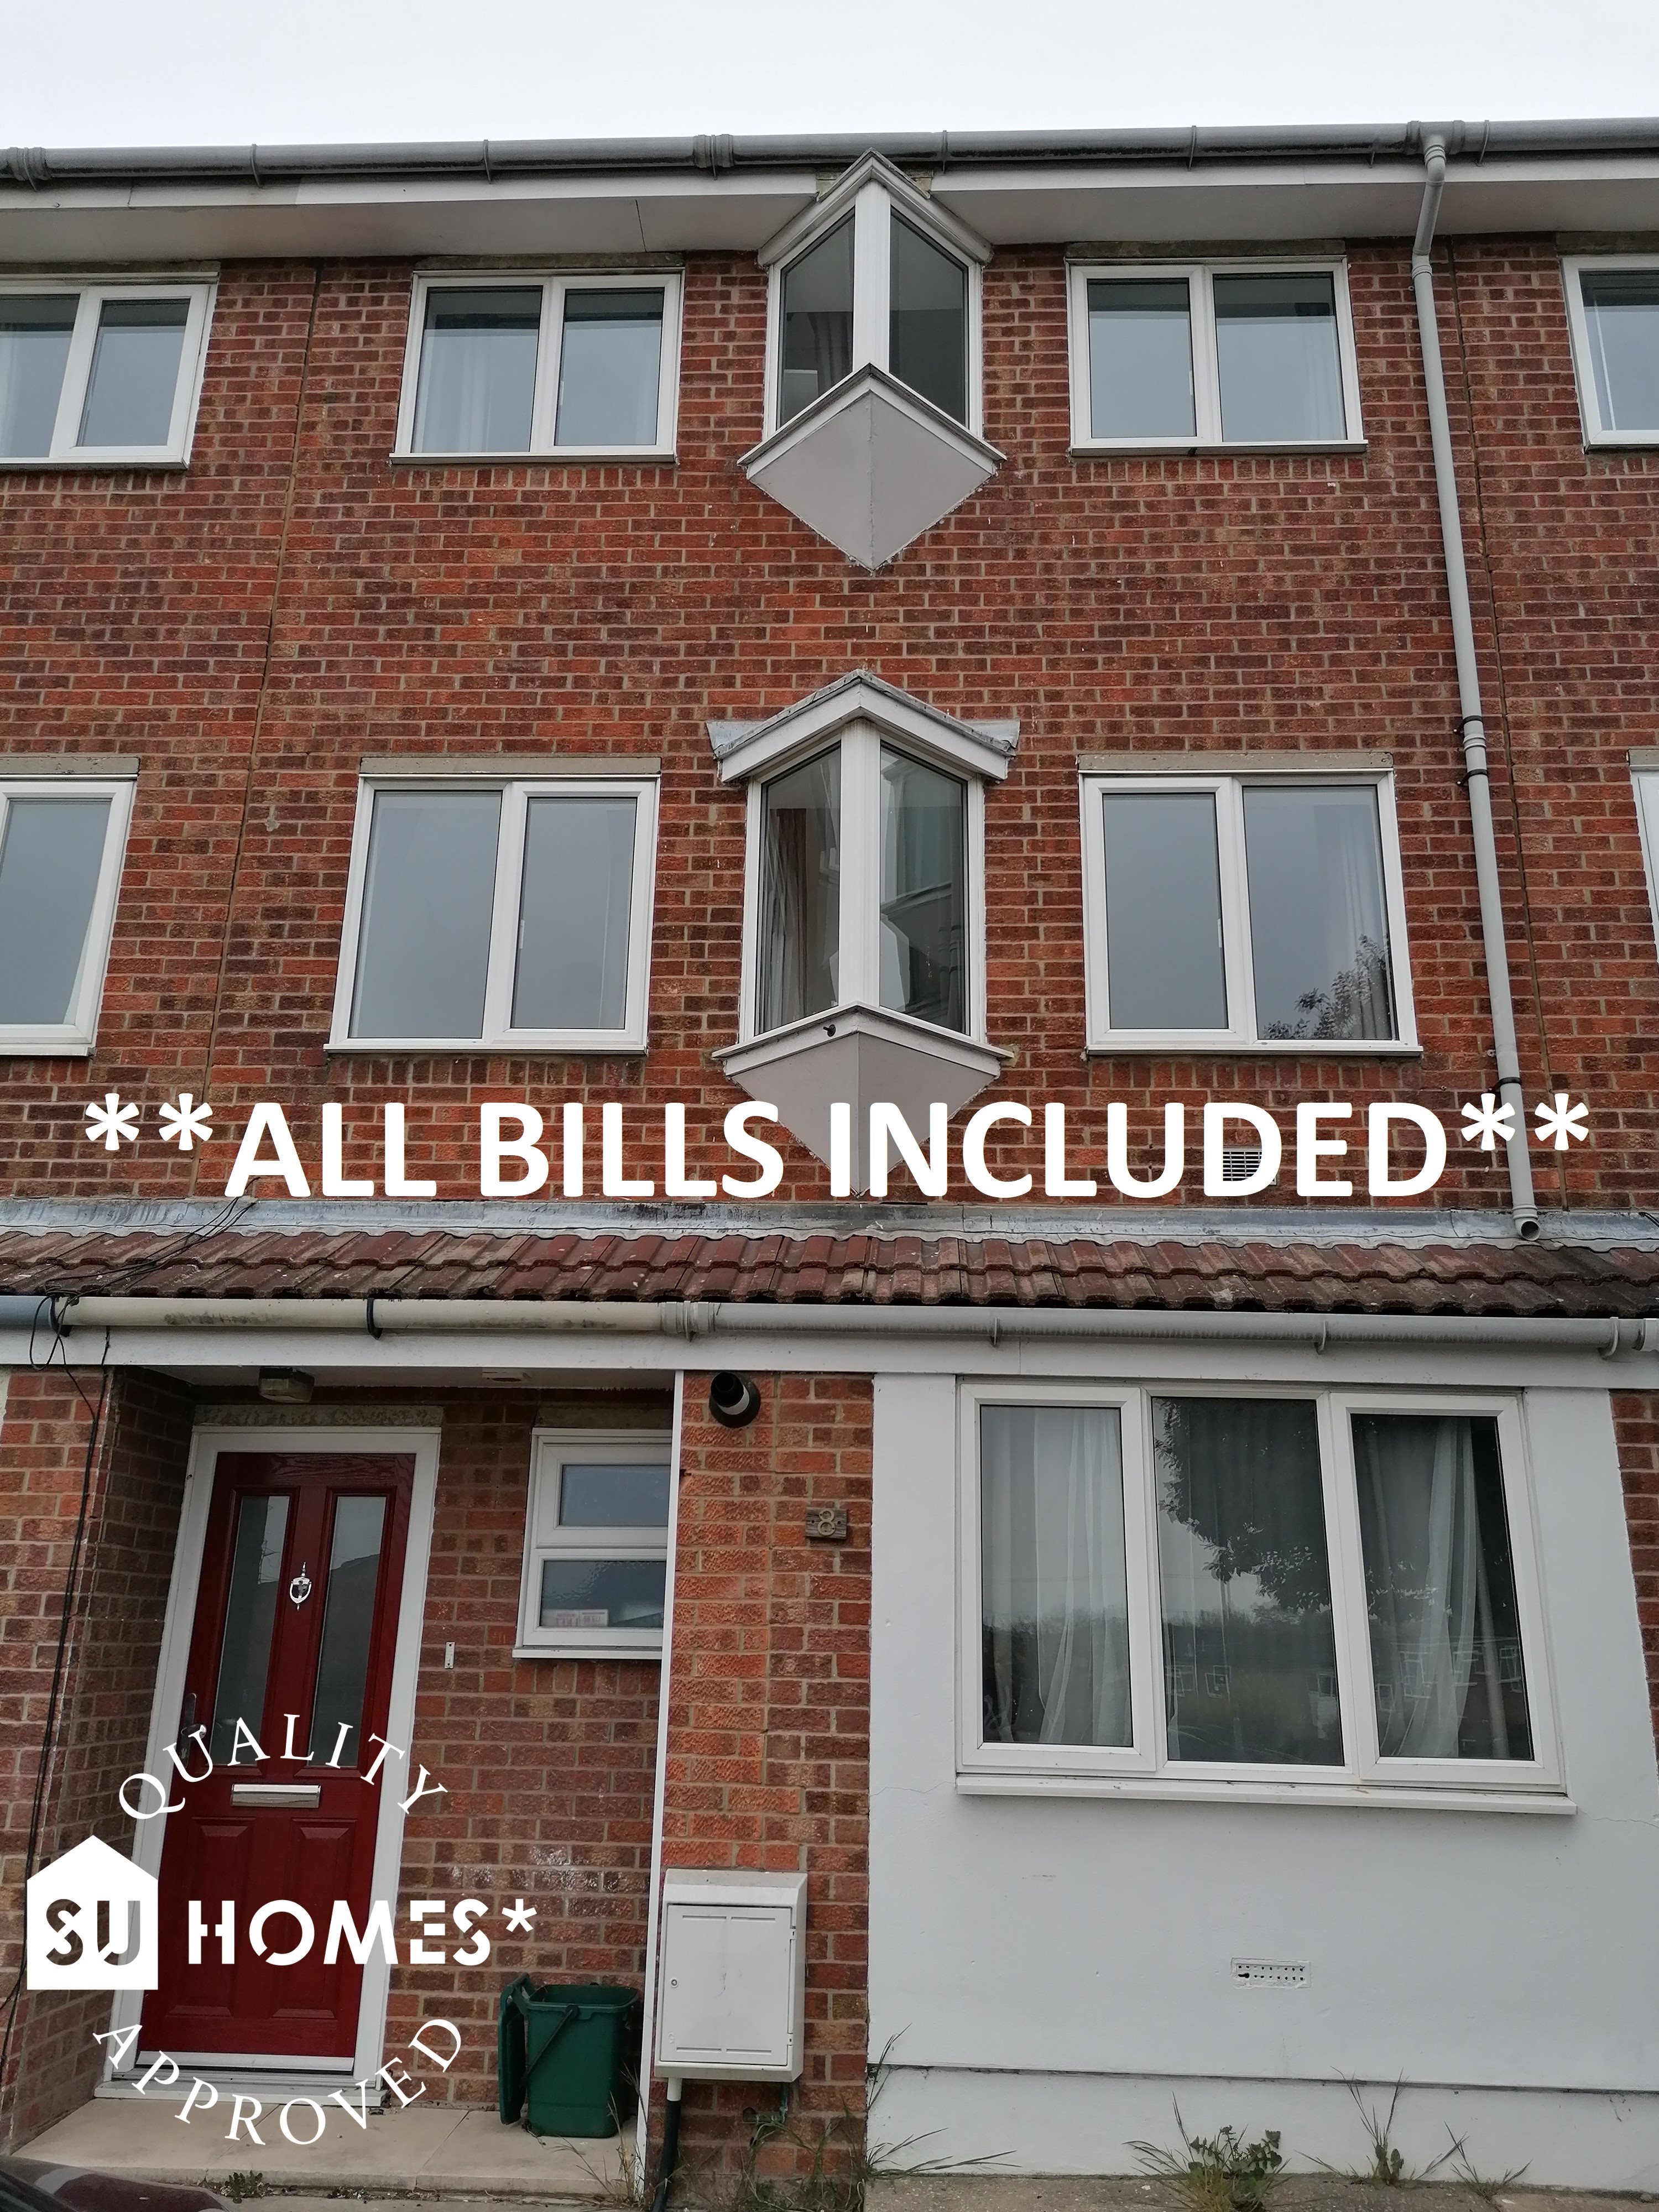 1 bed house / flat share to rent in Bennett Court, Colchester, CO4 